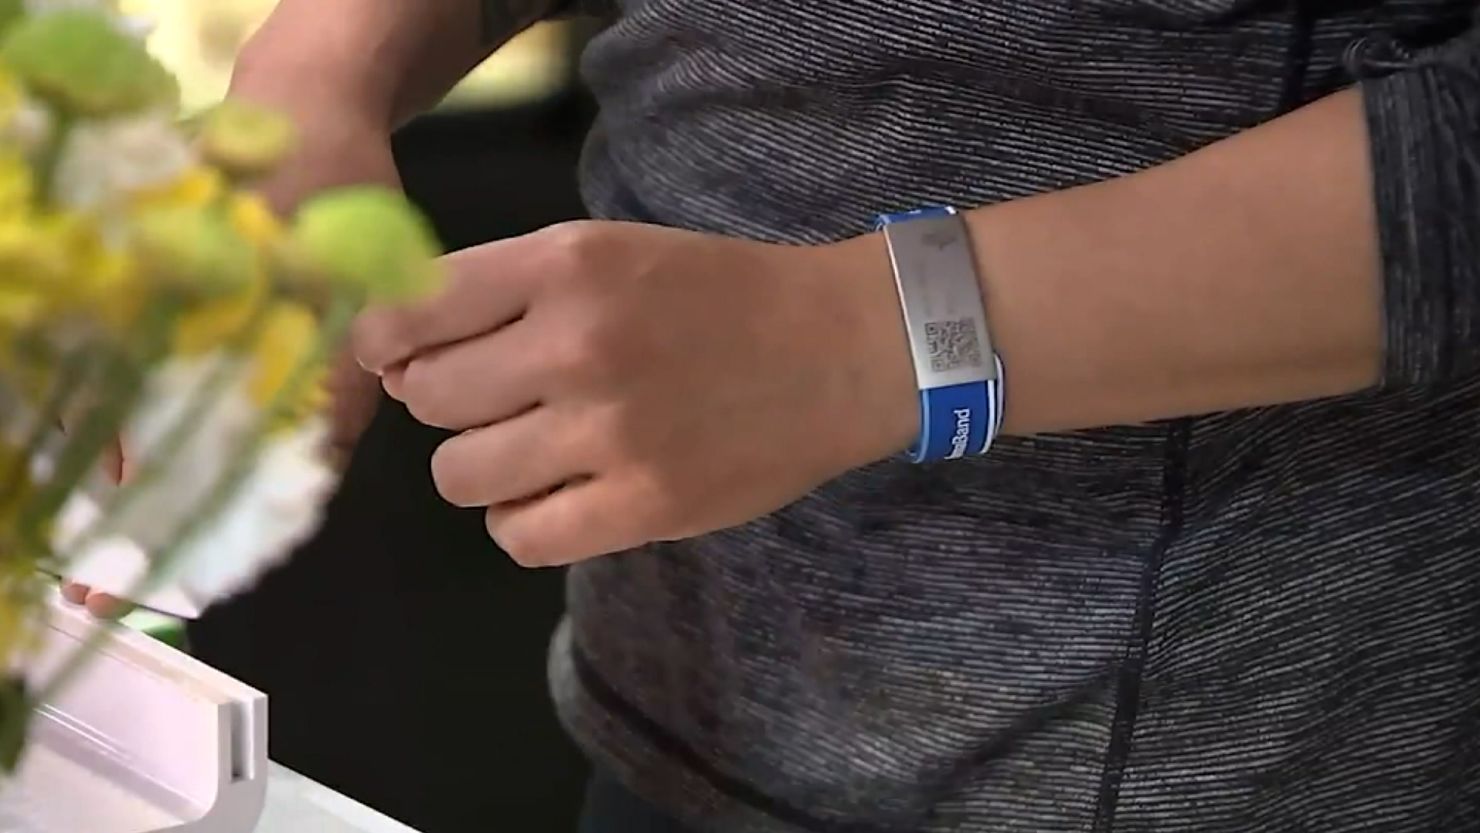 Employees at El Merkury in Philadelphia wear bands proving they have been vaccinated for Covid-19.